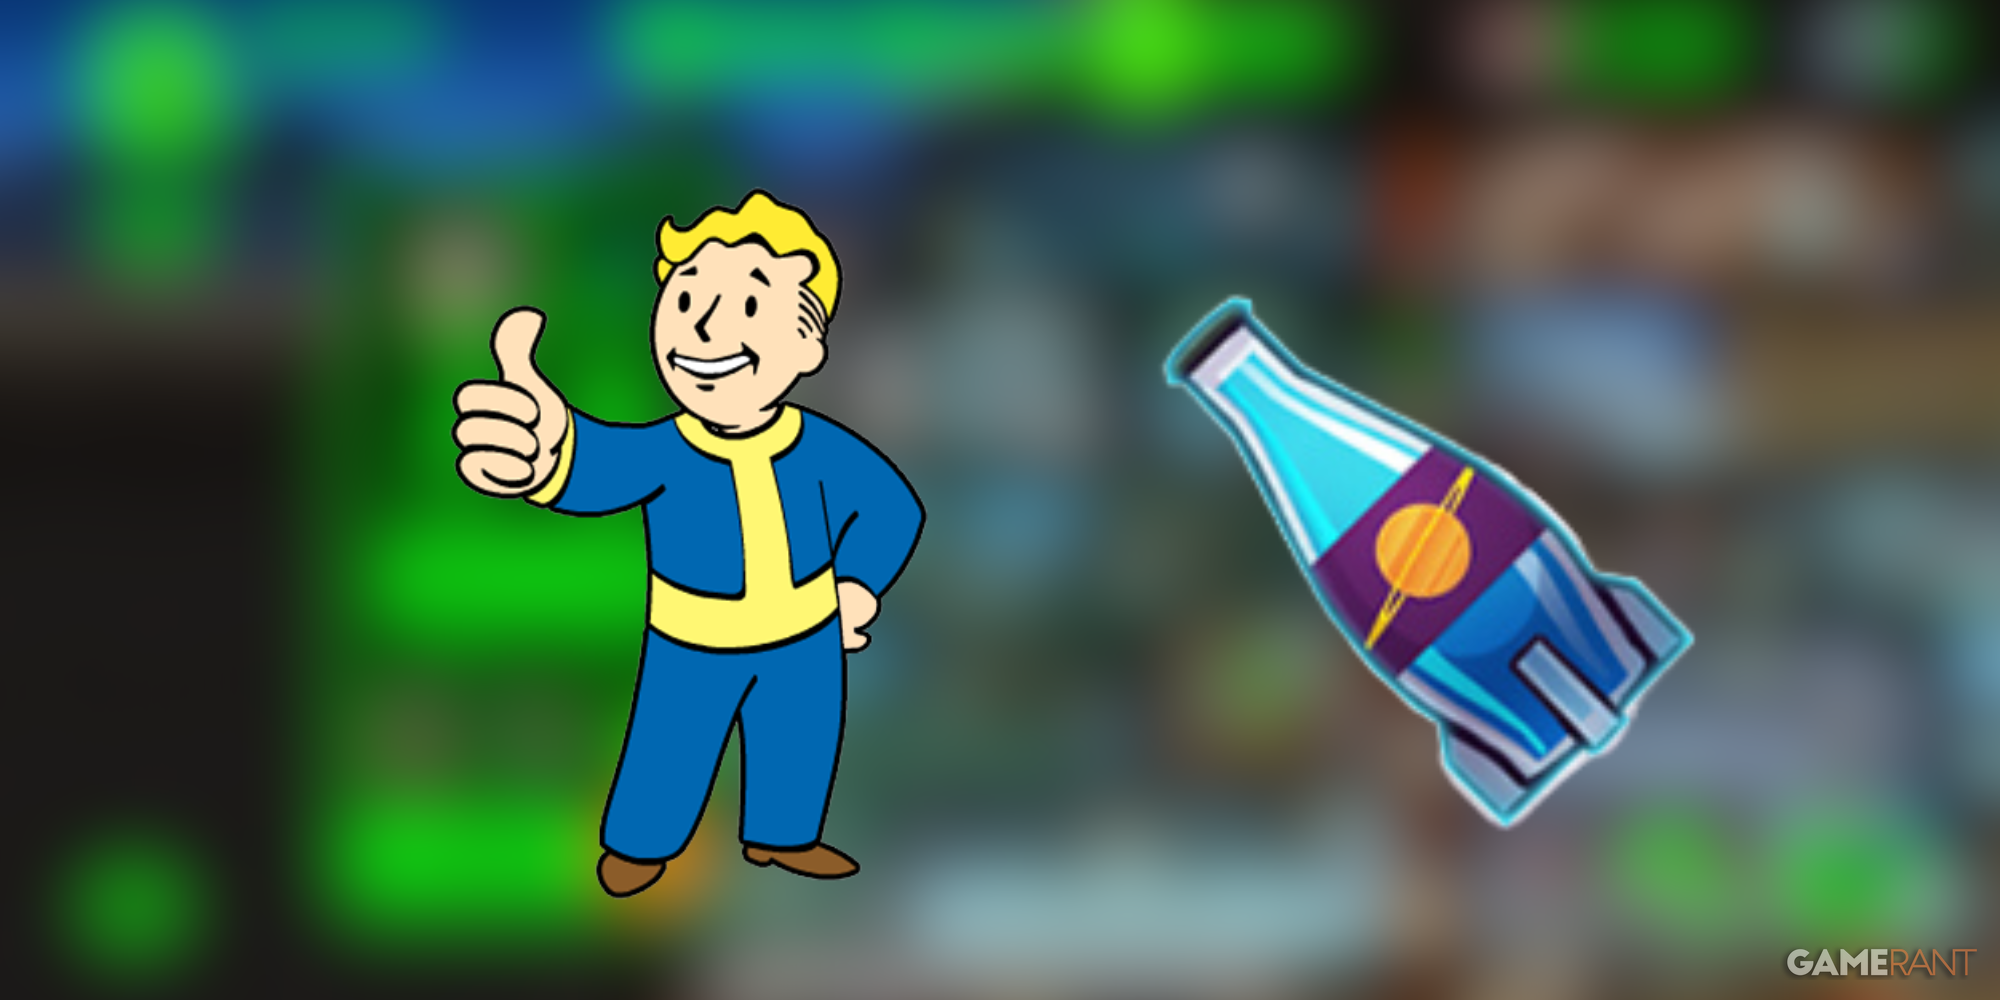 Fallout Shelter - Vault Boy Standing By A Nuka Cola Bottle